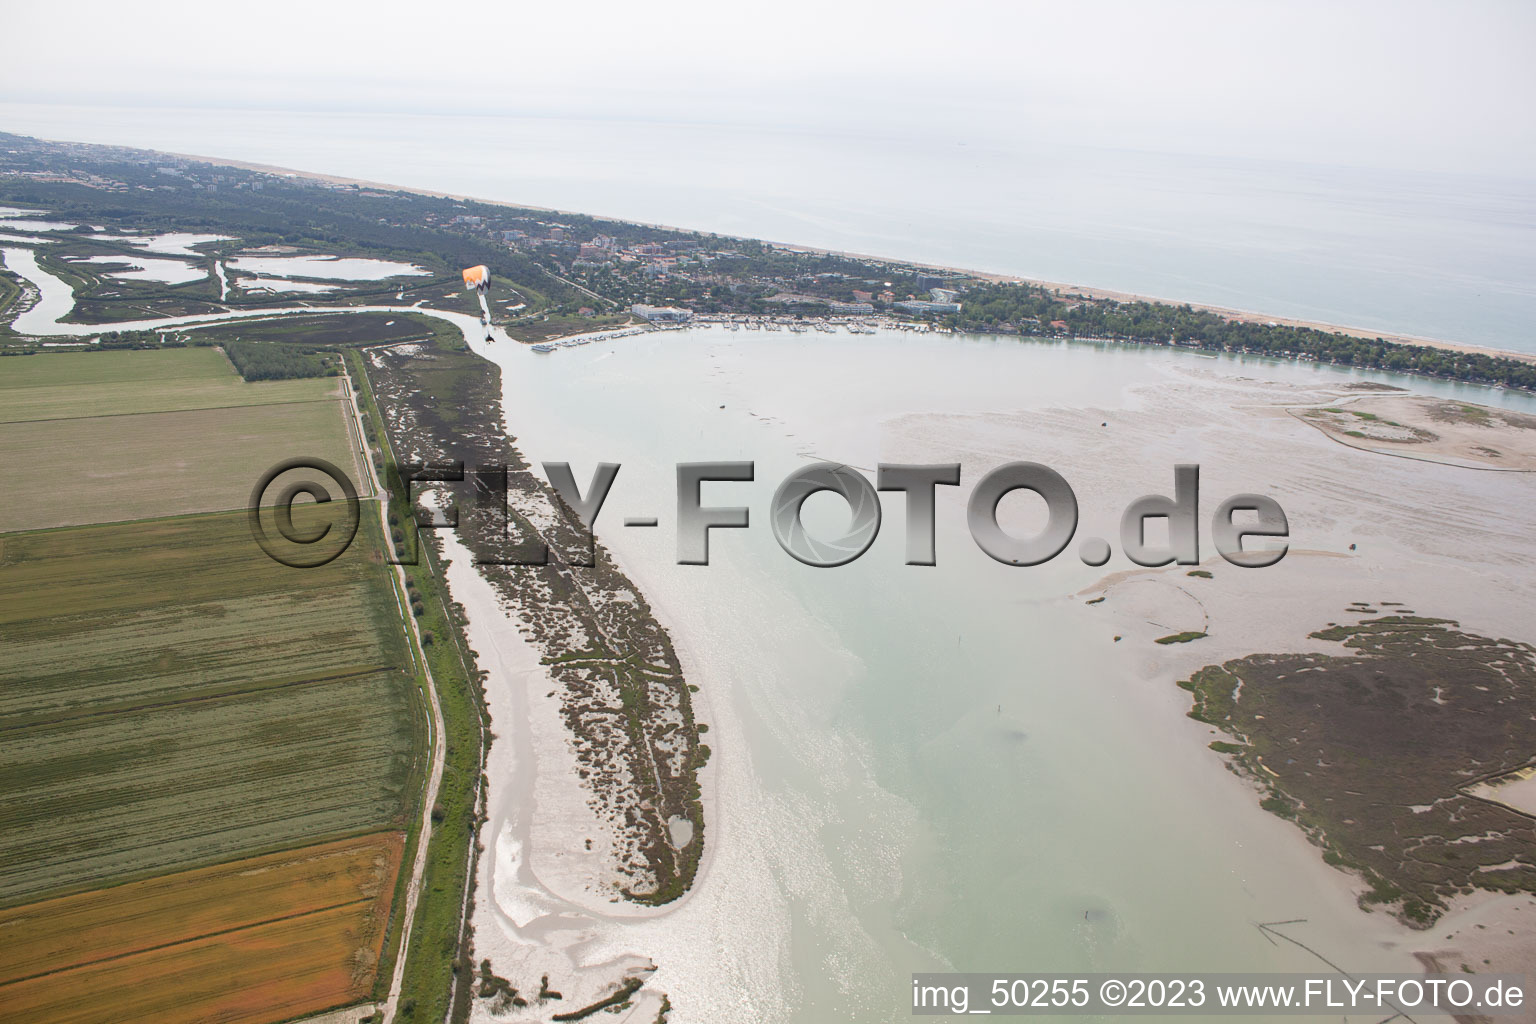 Aerial photograpy of Tragole in the state Veneto, Italy